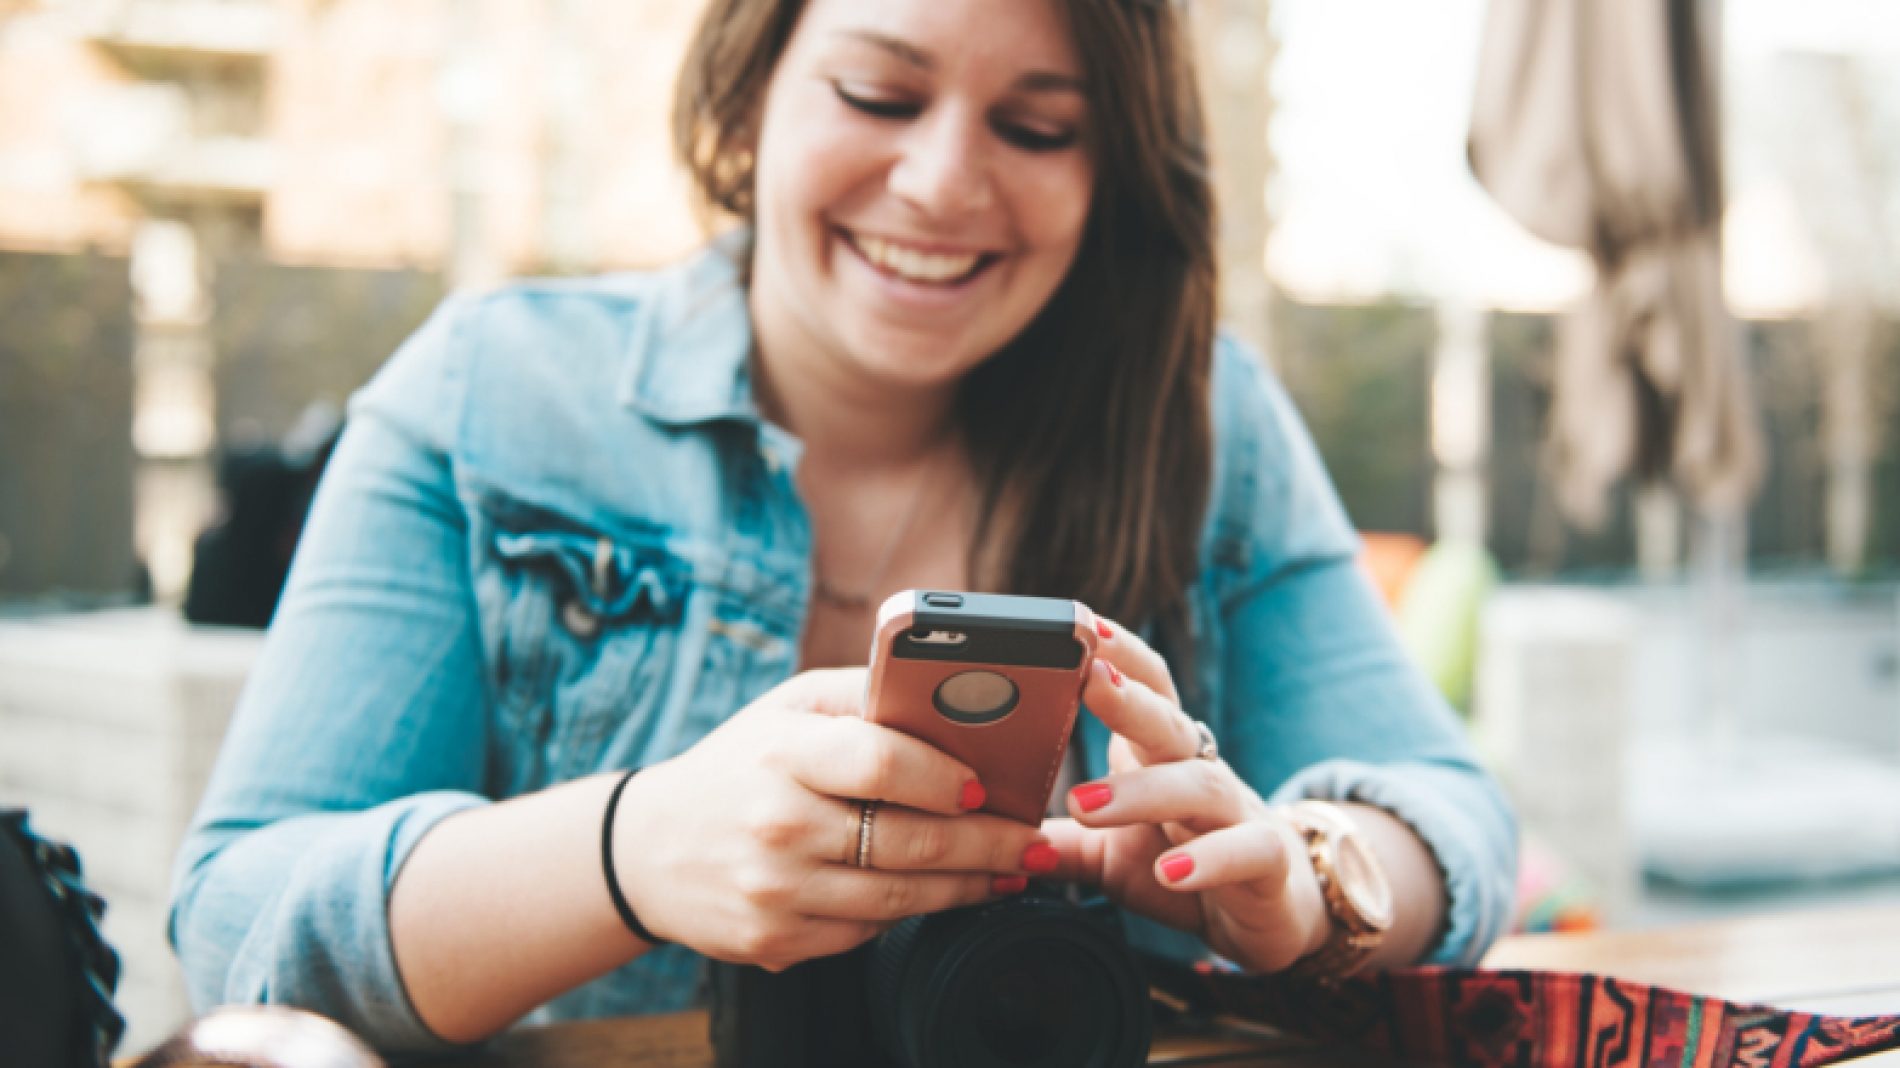 Young-person-smiling-with-phone-and-camera-9nKbMJ